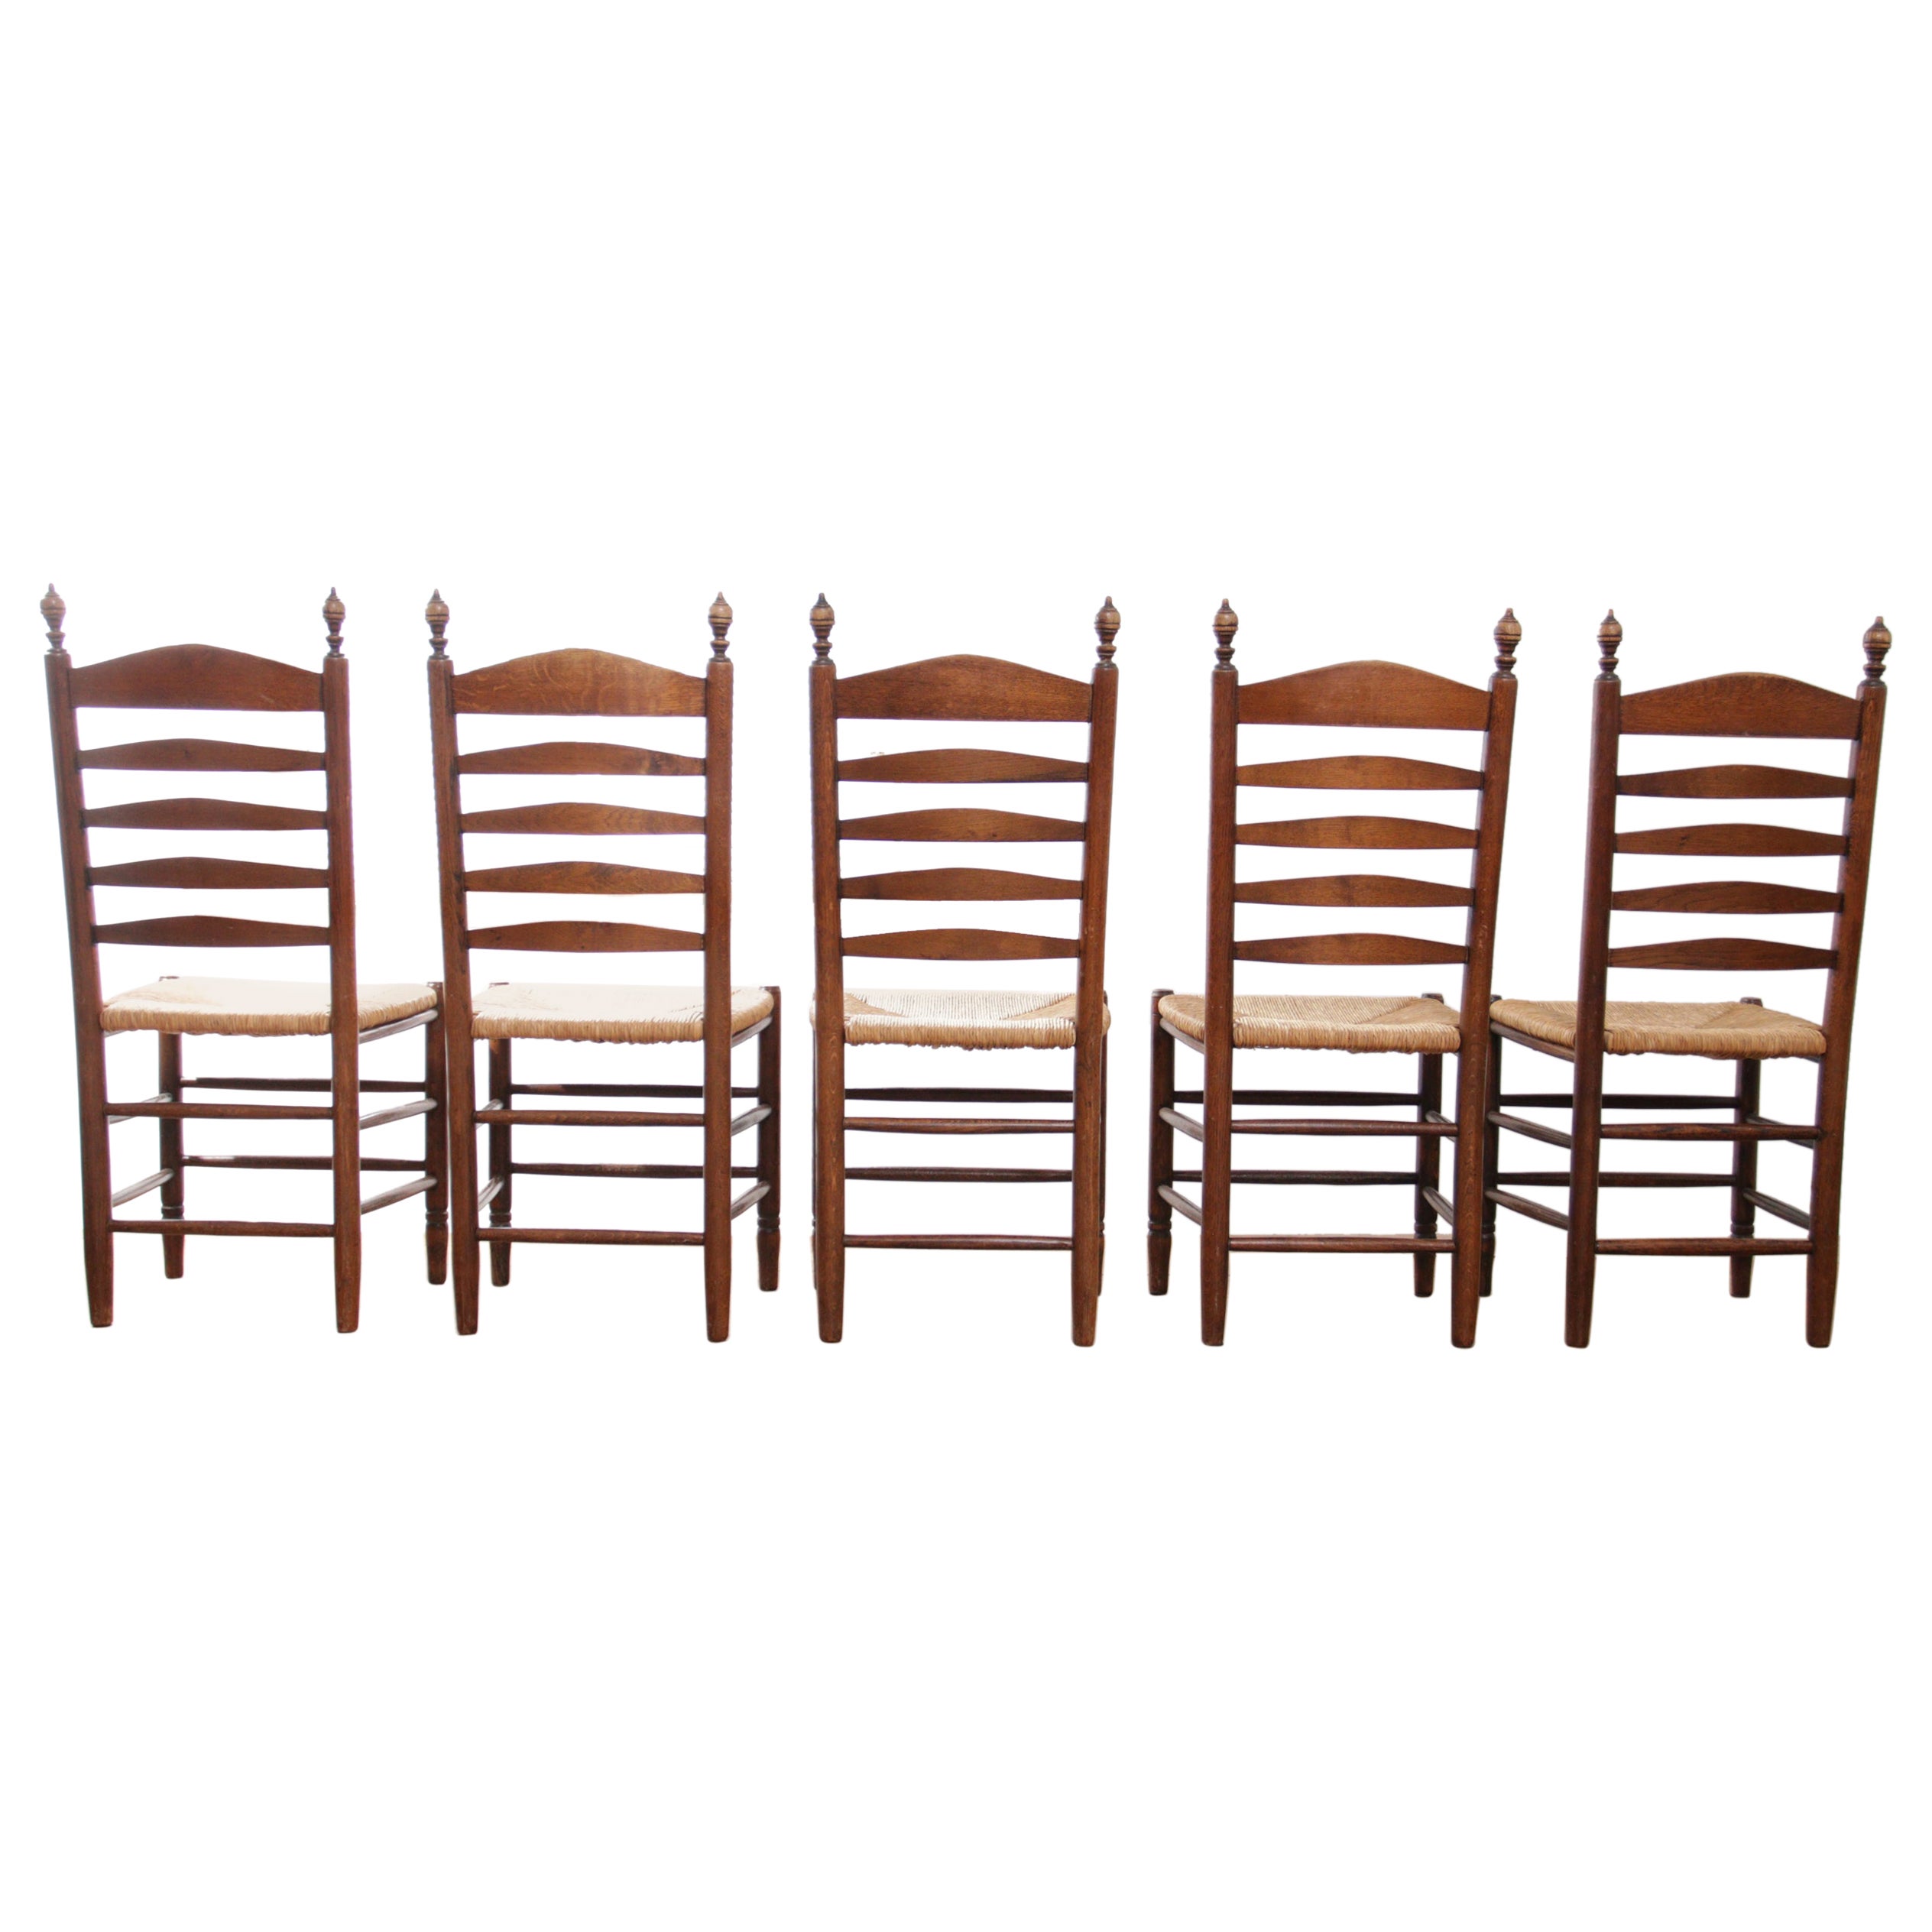 6 Beautiful ladderback chairs from the 30s made of oak with wicker woven seats.
Fit perfectly with the style of designers such as Charlotte Perriand and Charles Dudouyt.
They are comfortable and have a very nice warm appearance due to the use of